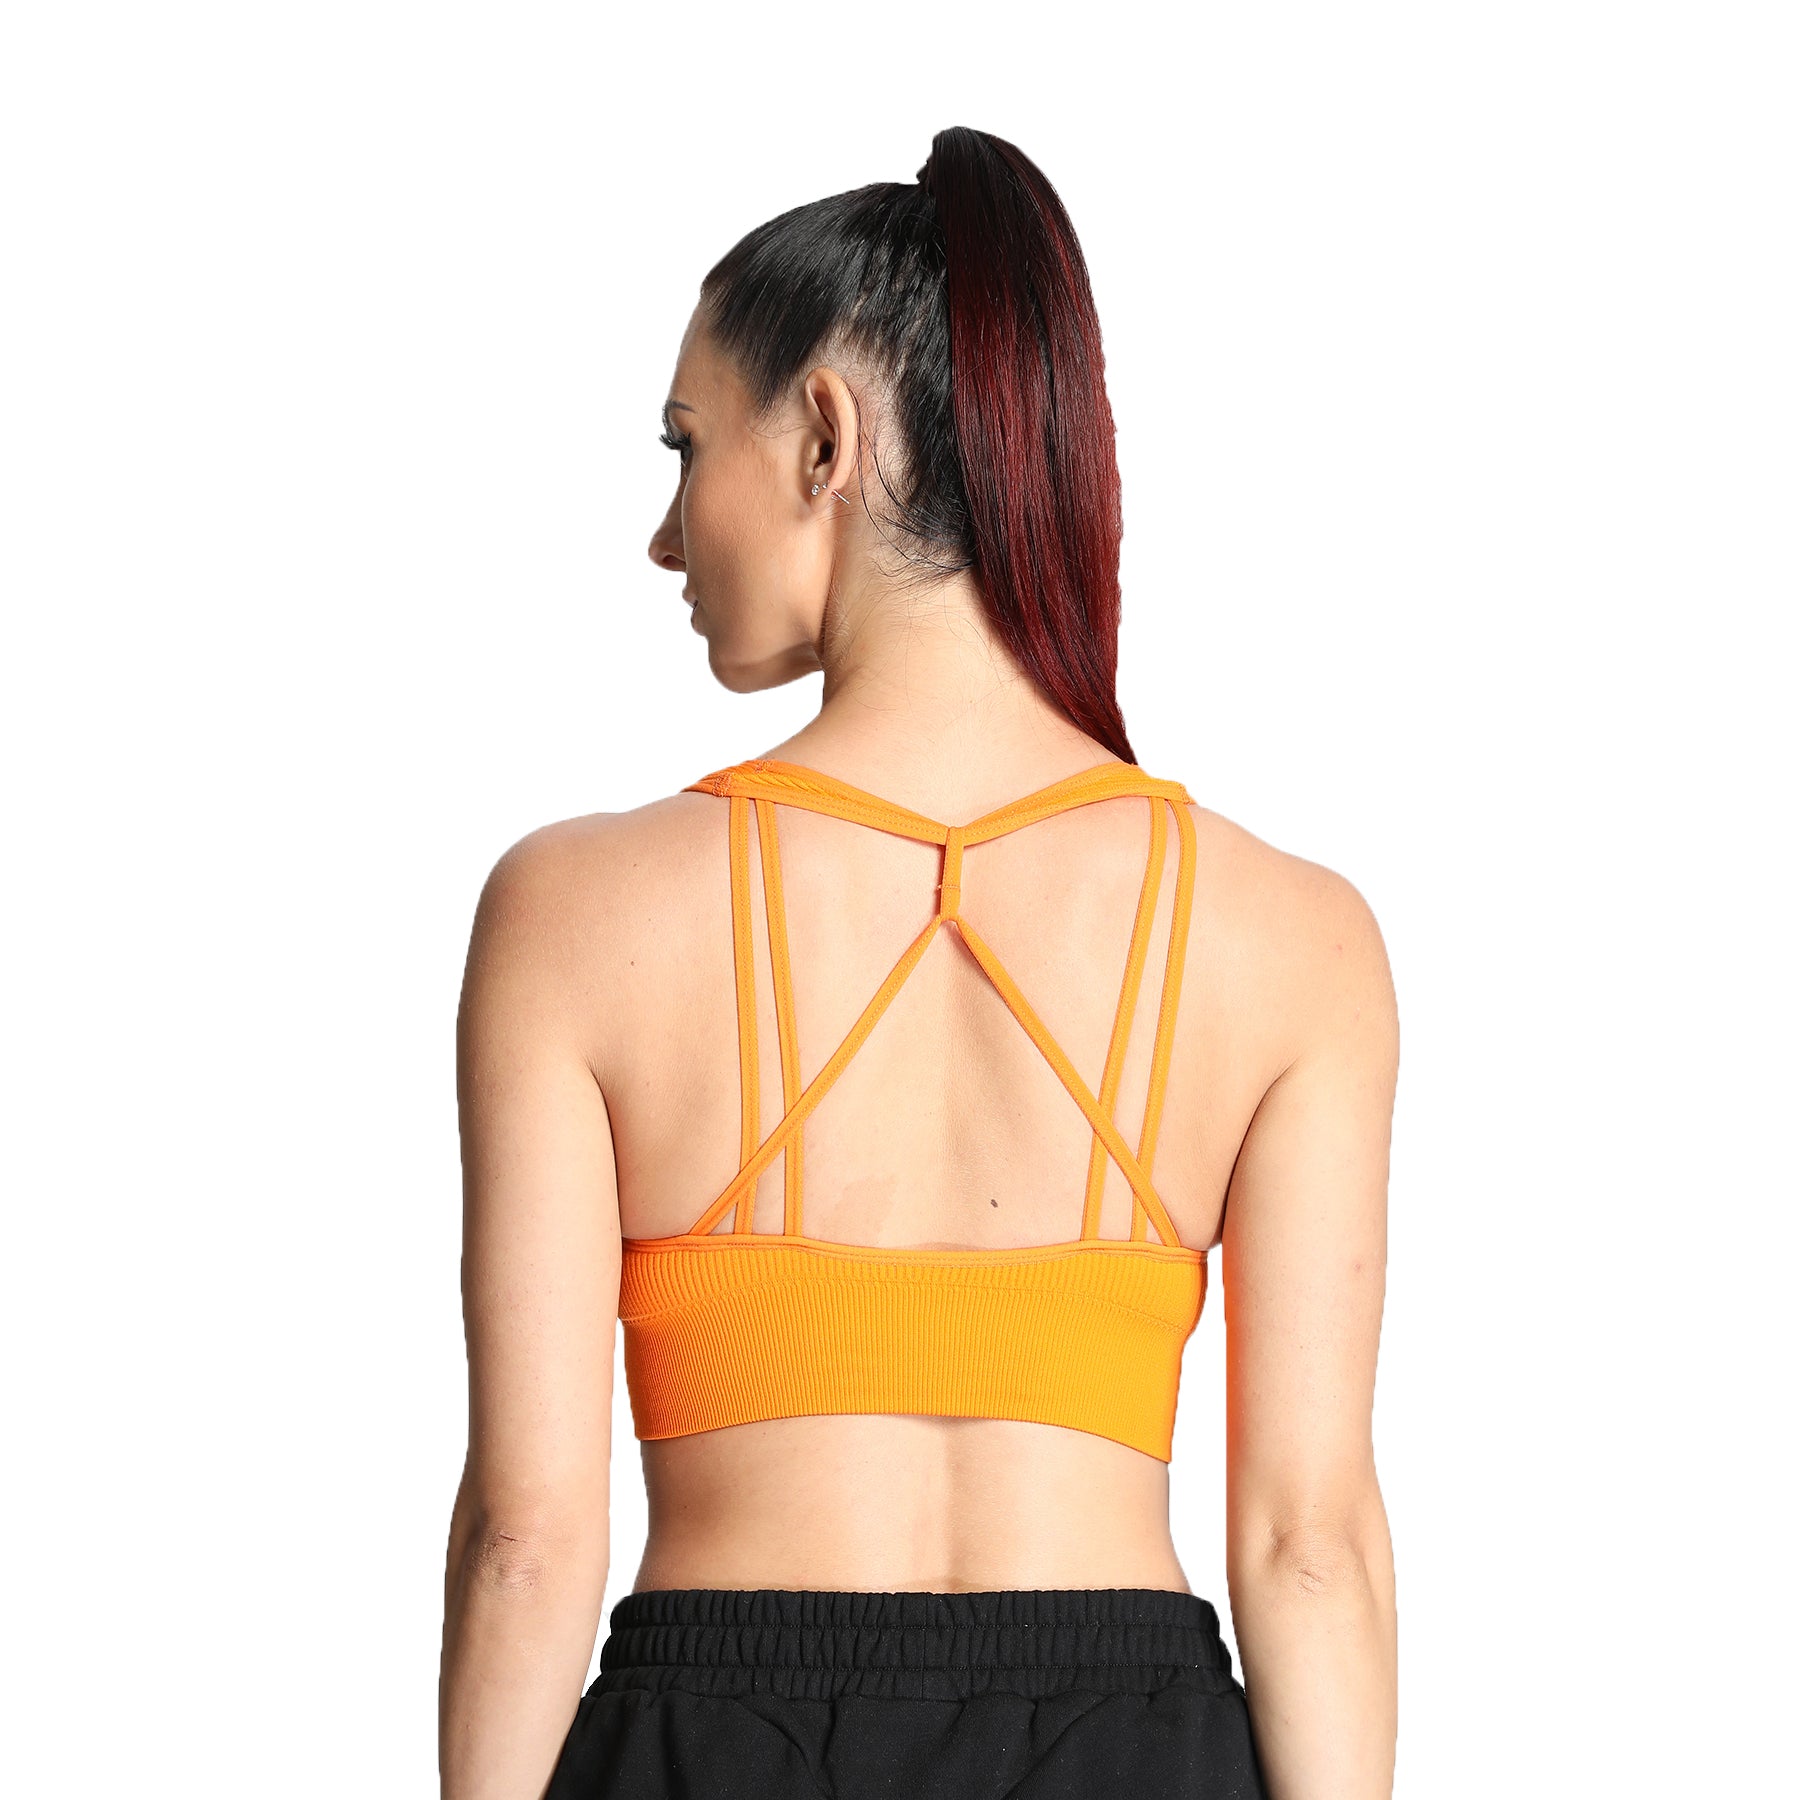 Another amazing Aoxjox bra! #aoxjox #find #activewear #aox